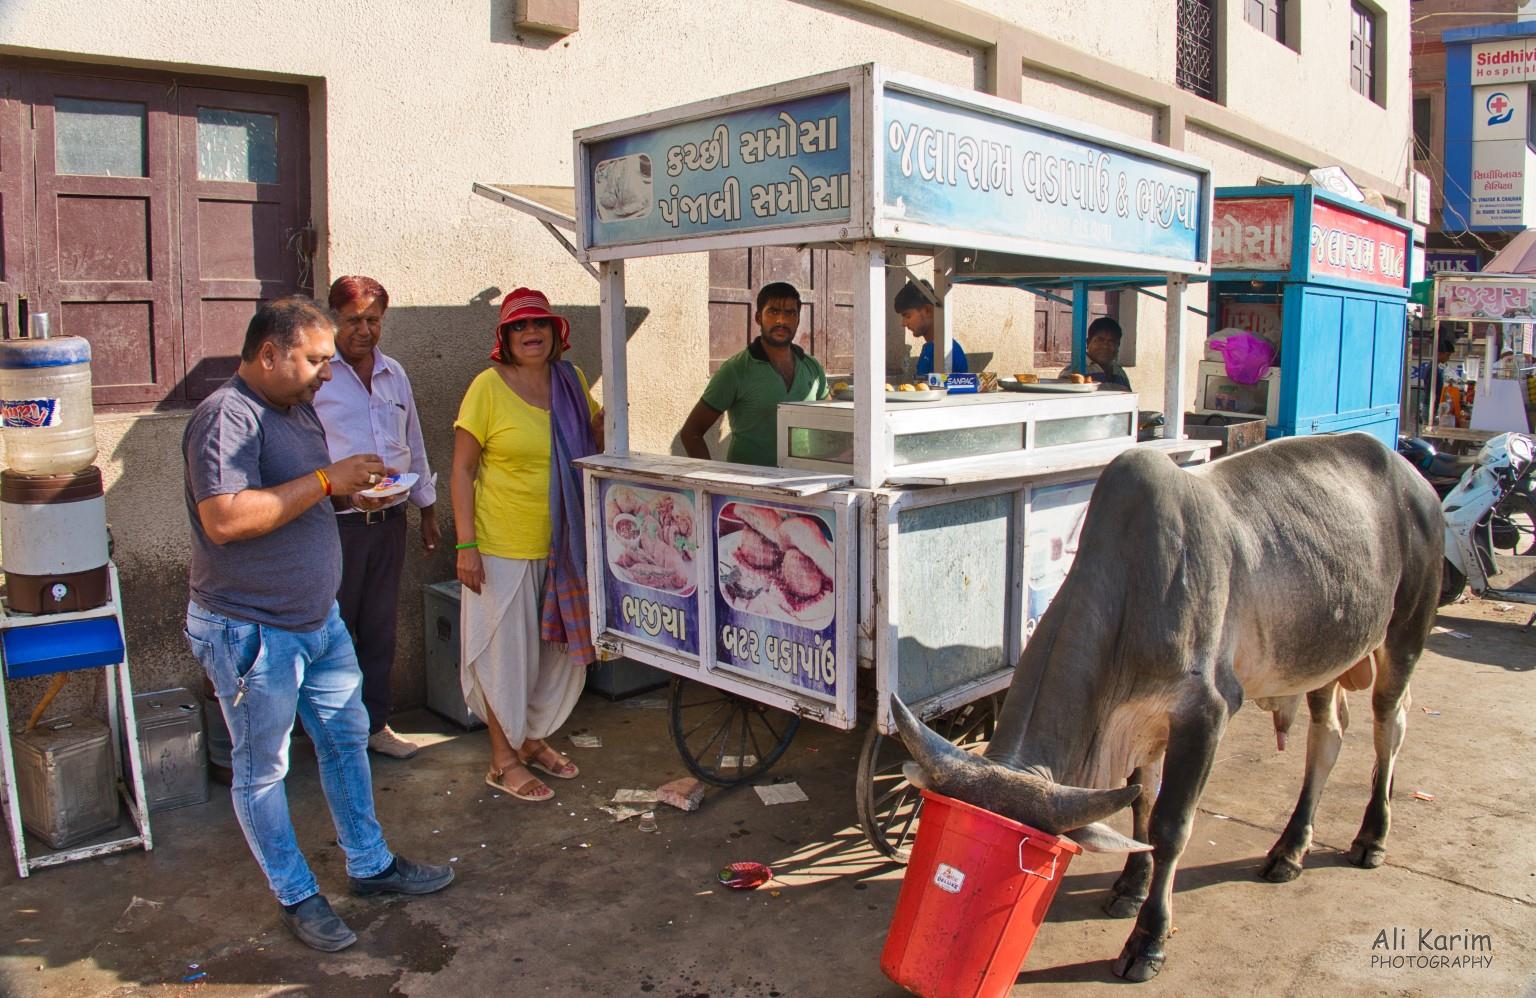 More Bhuj Bateta-vada stall; the bull strolled by and helped himself to food they leave out for the cows.